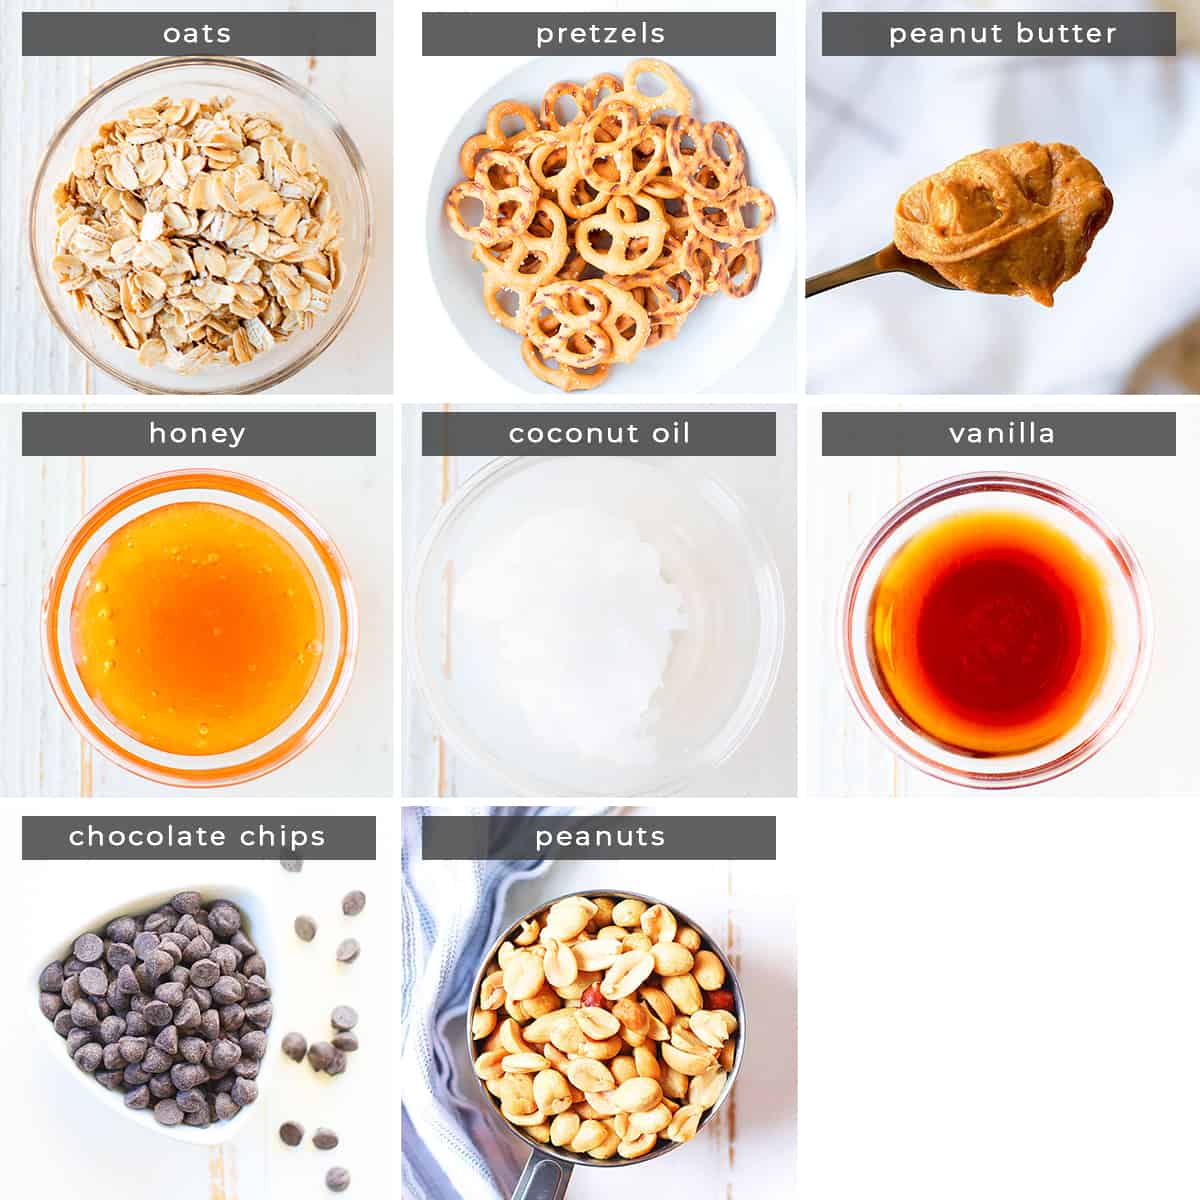 Image containing recipe ingredients oats, pretzels, peanut butter, honey, coconut oil, vanilla, chocolate chips, peanuts.